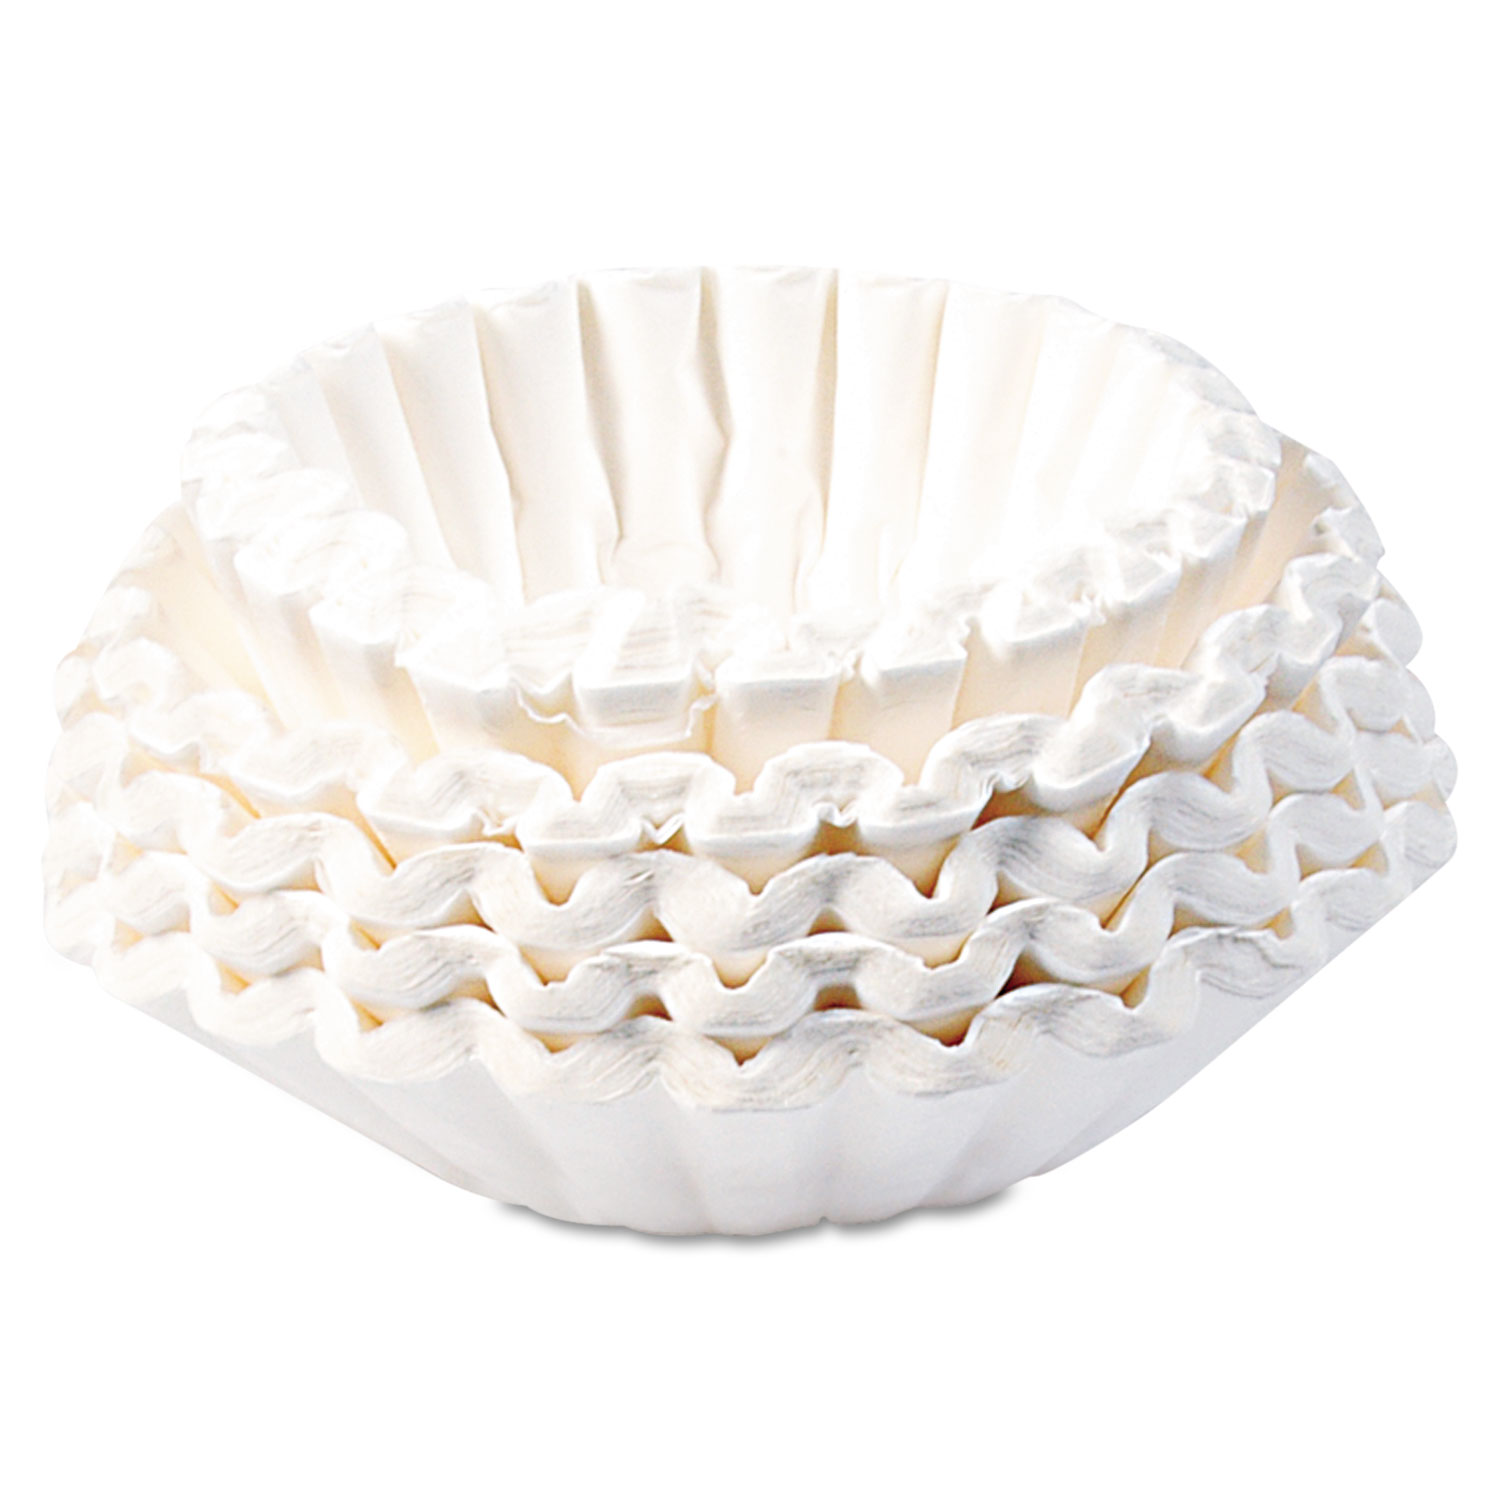  BUNN 20132.0000 Flat Bottom Coffee Filters, Paper, 12-Cup Size (BUNBCF250CT) 